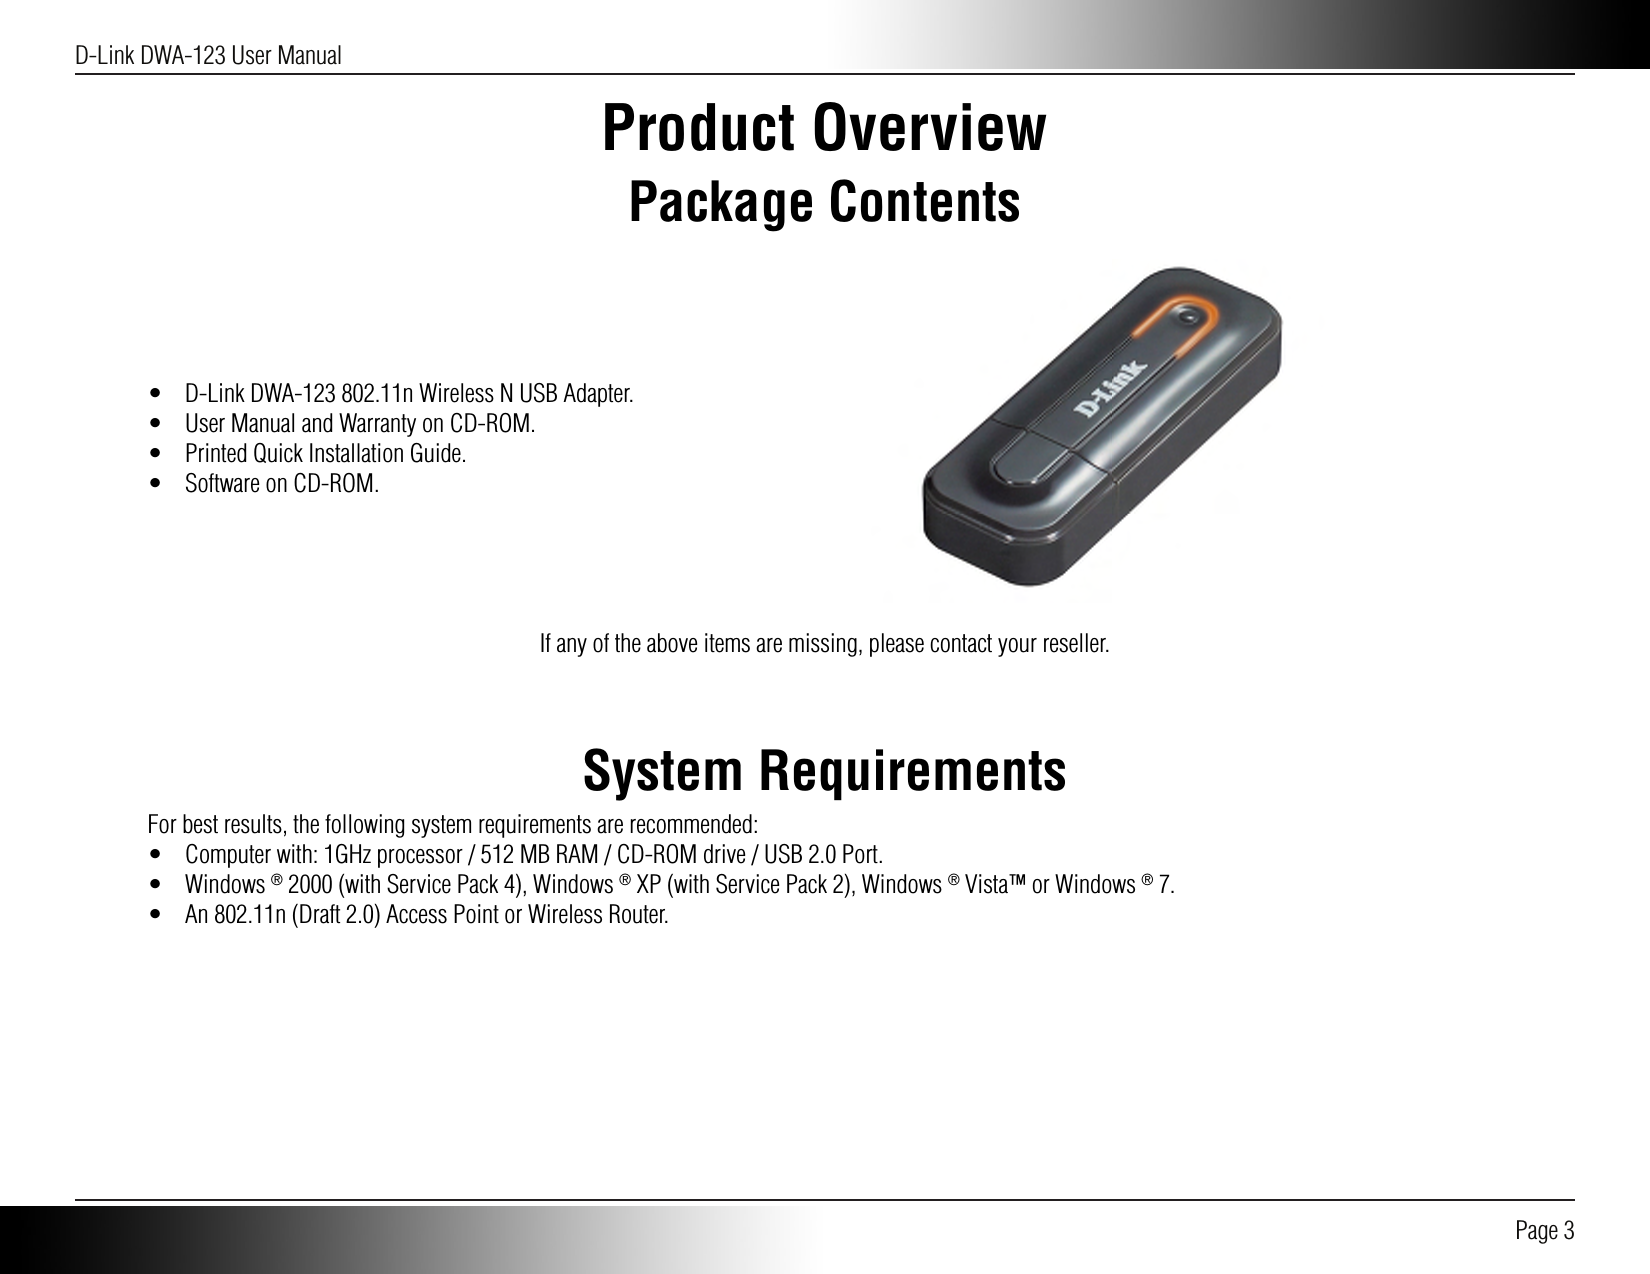 D-Link DWA-123 User Manual Page 3Product OverviewPackage Contents•  D-Link DWA-123 802.11n Wireless N USB Adapter.•  User Manual and Warranty on CD-ROM.•  Printed Quick Installation Guide.•  Software on CD-ROM.If any of the above items are missing, please contact your reseller.System RequirementsFor best results, the following system requirements are recommended:•  Computer with: 1GHz processor / 512 MB RAM / CD-ROM drive / USB 2.0 Port.•  Windows ® 2000 (with Service Pack 4), Windows ® XP (with Service Pack 2), Windows ® Vista™ or Windows ® 7.•  An 802.11n (Draft 2.0) Access Point or Wireless Router.